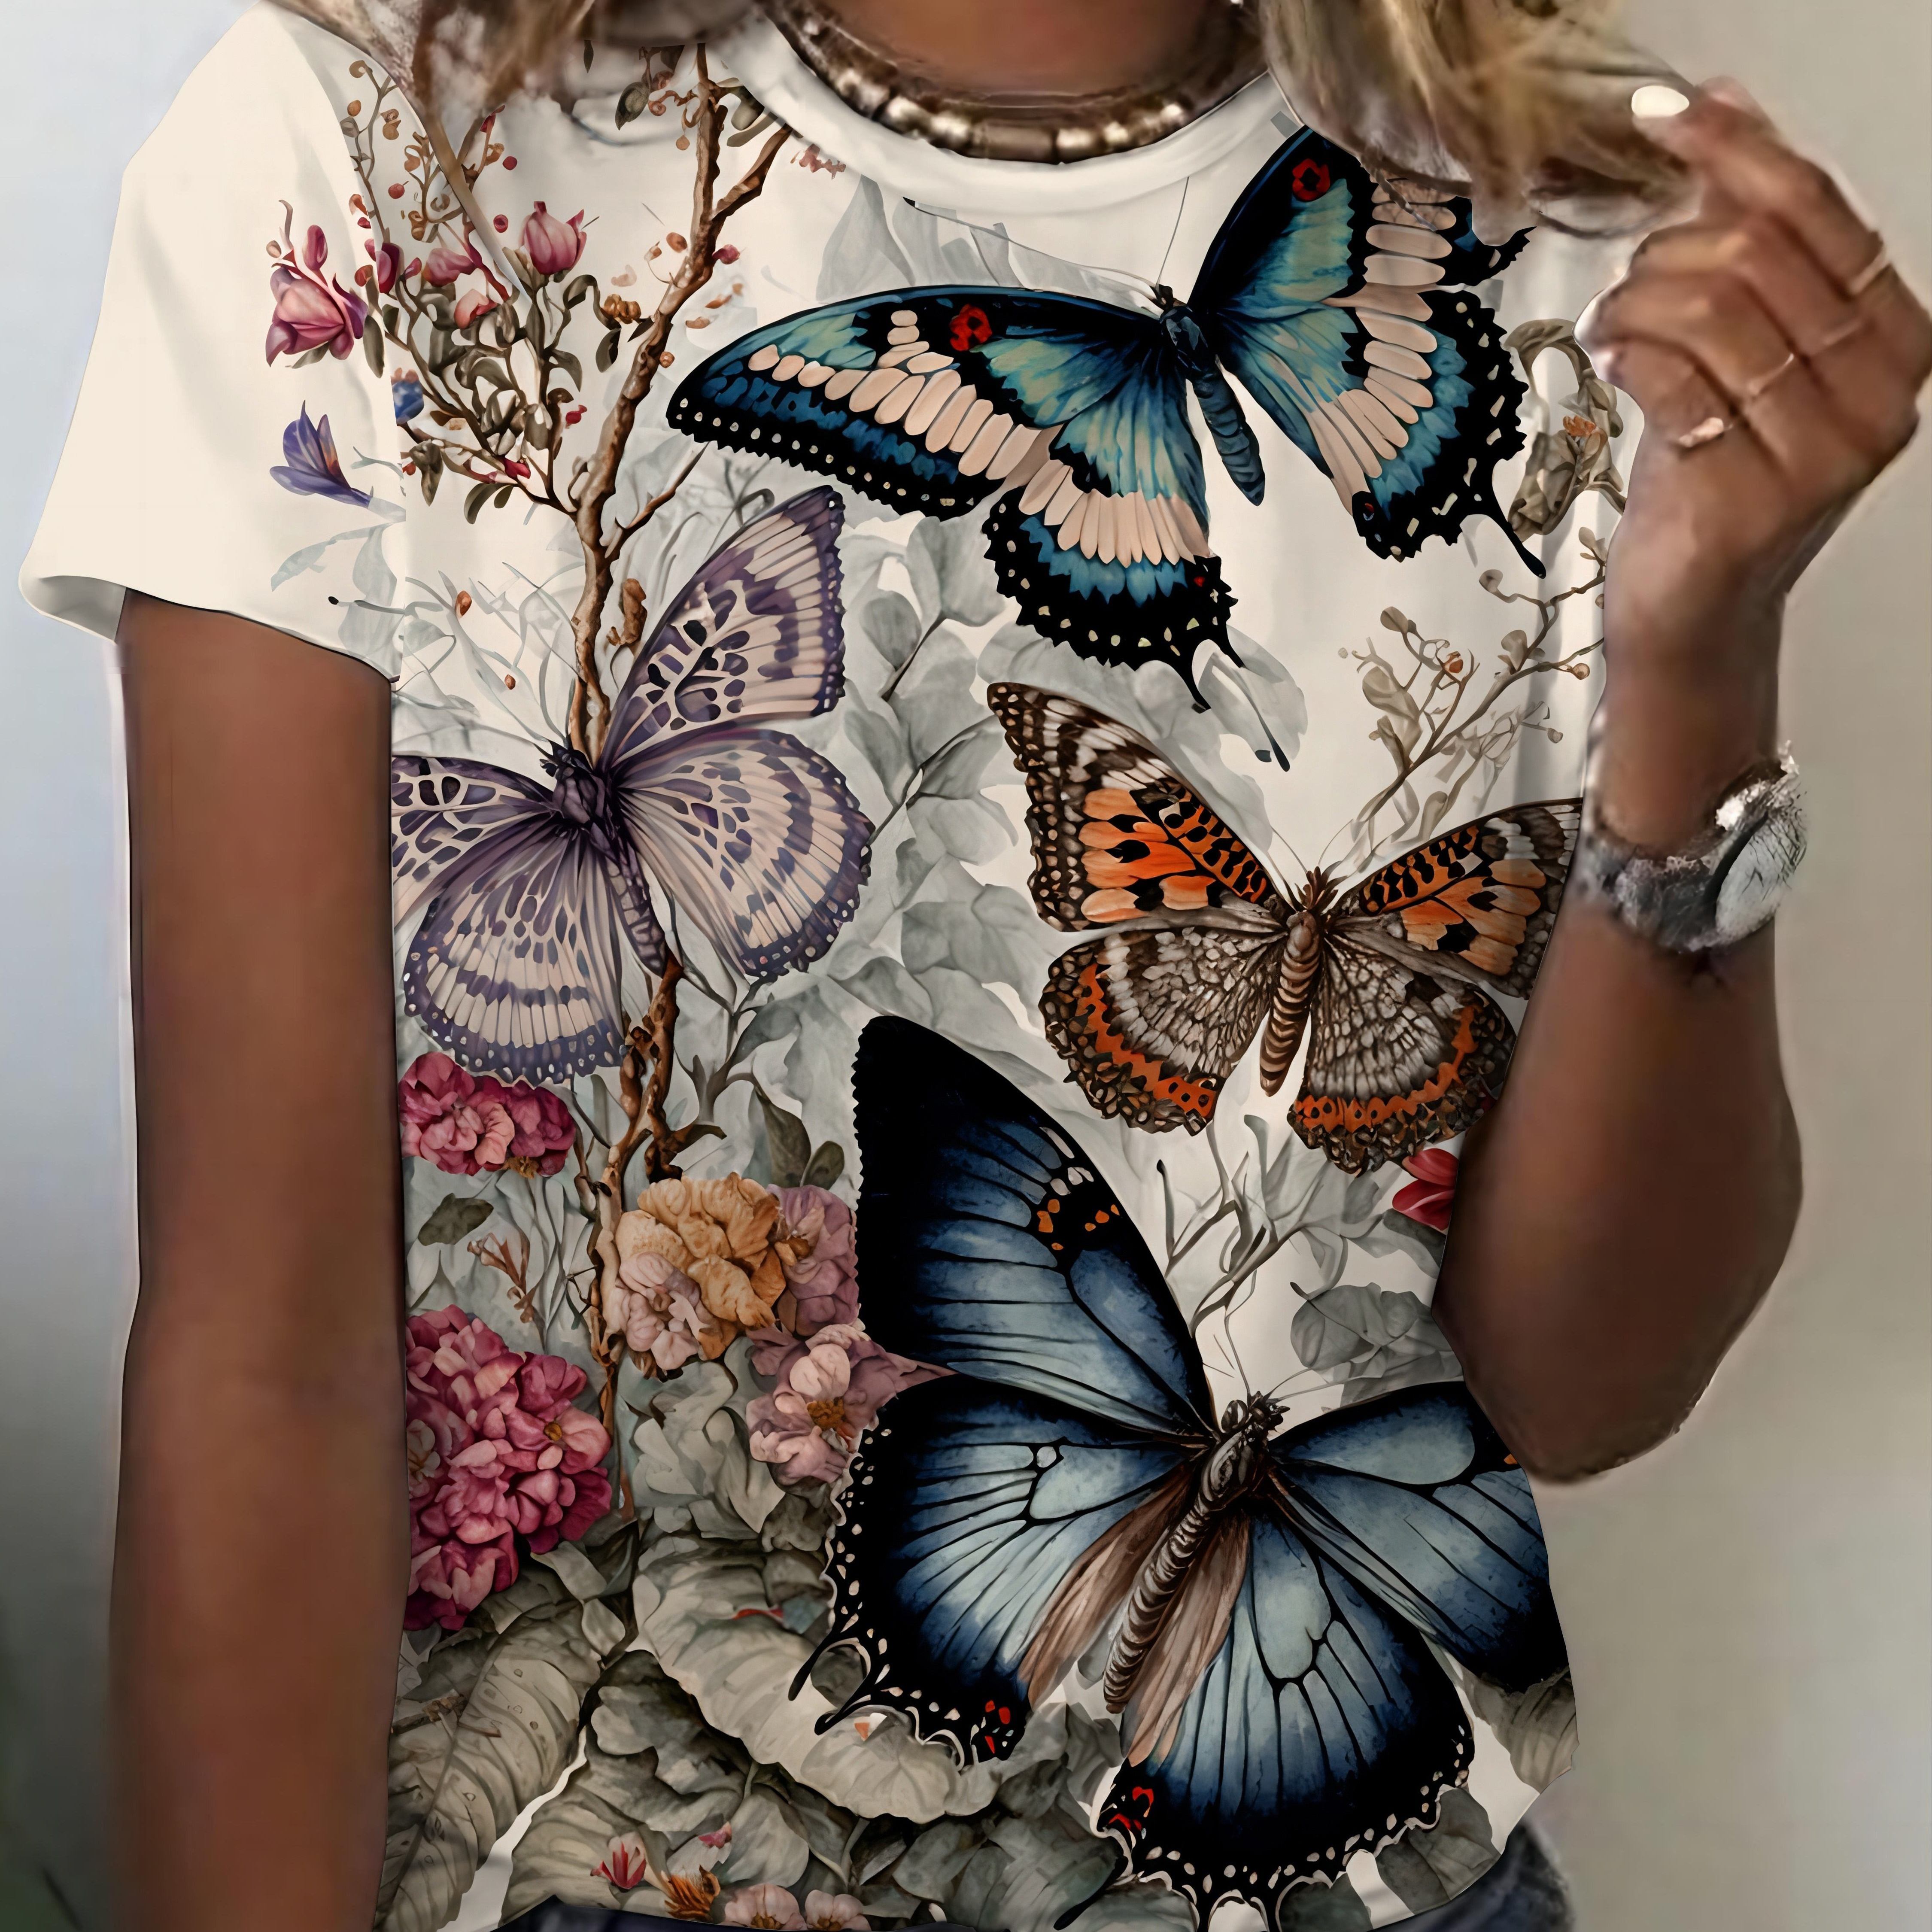 

Women's Casual Butterfly Print T-shirt, 3d Printed Short Sleeve Top, Fashionable Crew Neck Tee For Daily Wear